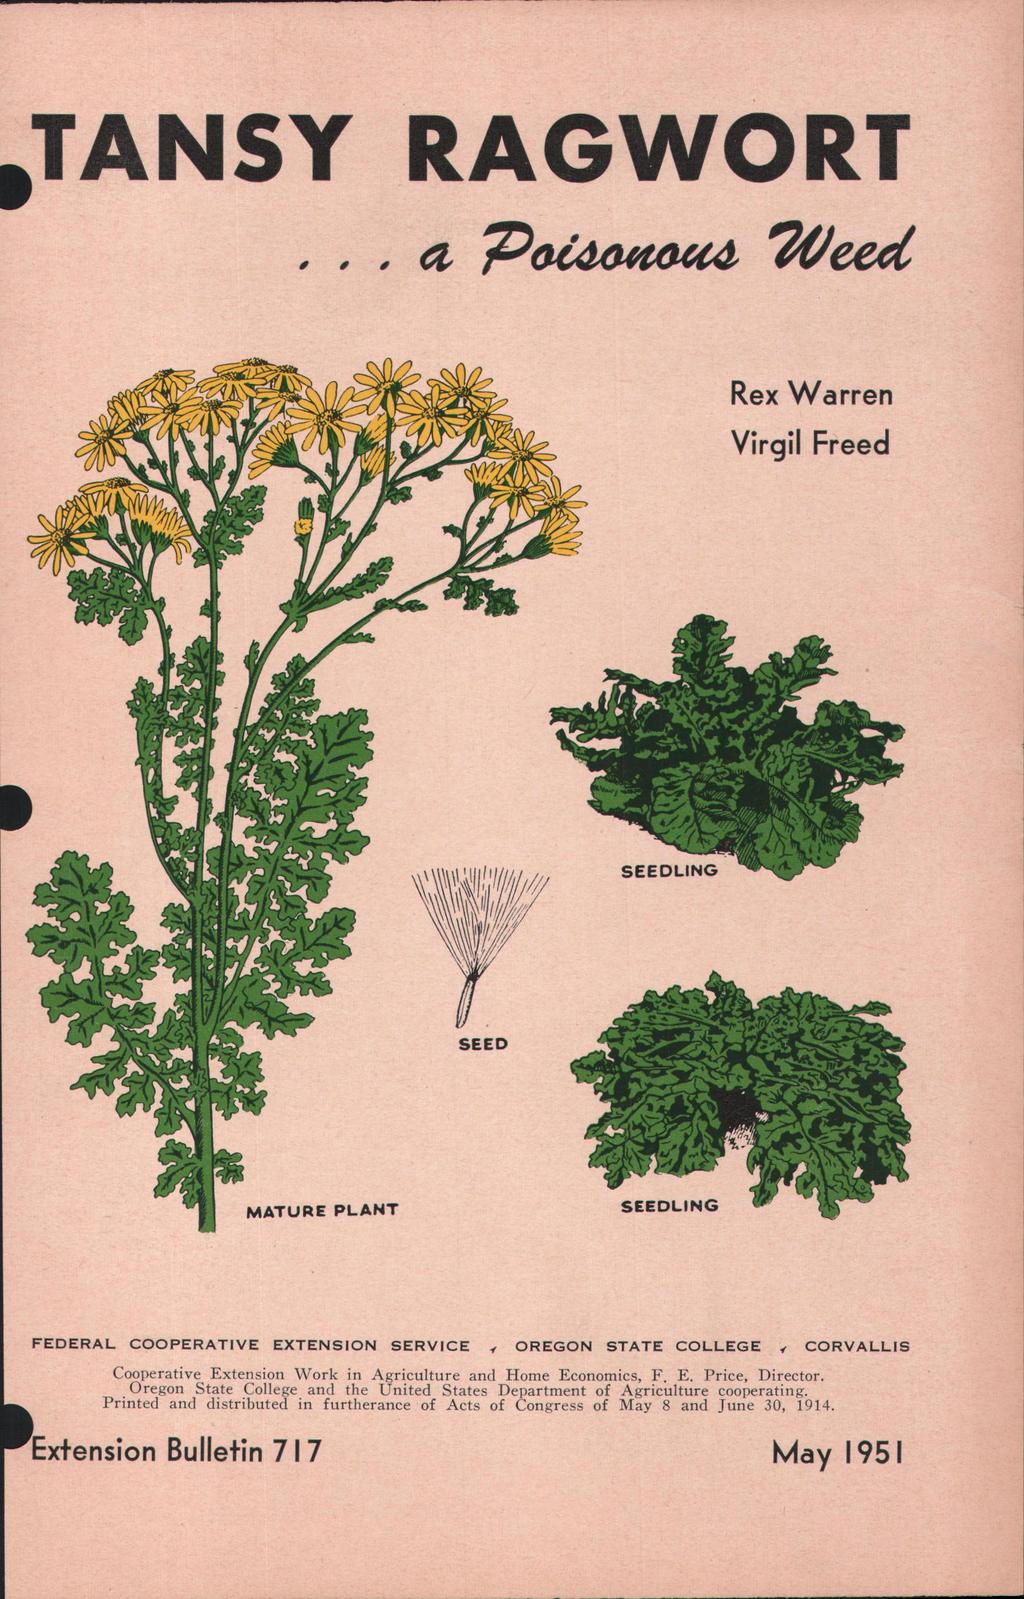 TANSY RAGWORT a Paid-of/ma 20eed Rex Warren Virgil Freed MATURE PLANT FEDERAL COOPERATIVE EXTENSION SERVICE, OREGON STATE COLLEGE, CORVALLIS Cooperative Extension Work in Agriculture and Home